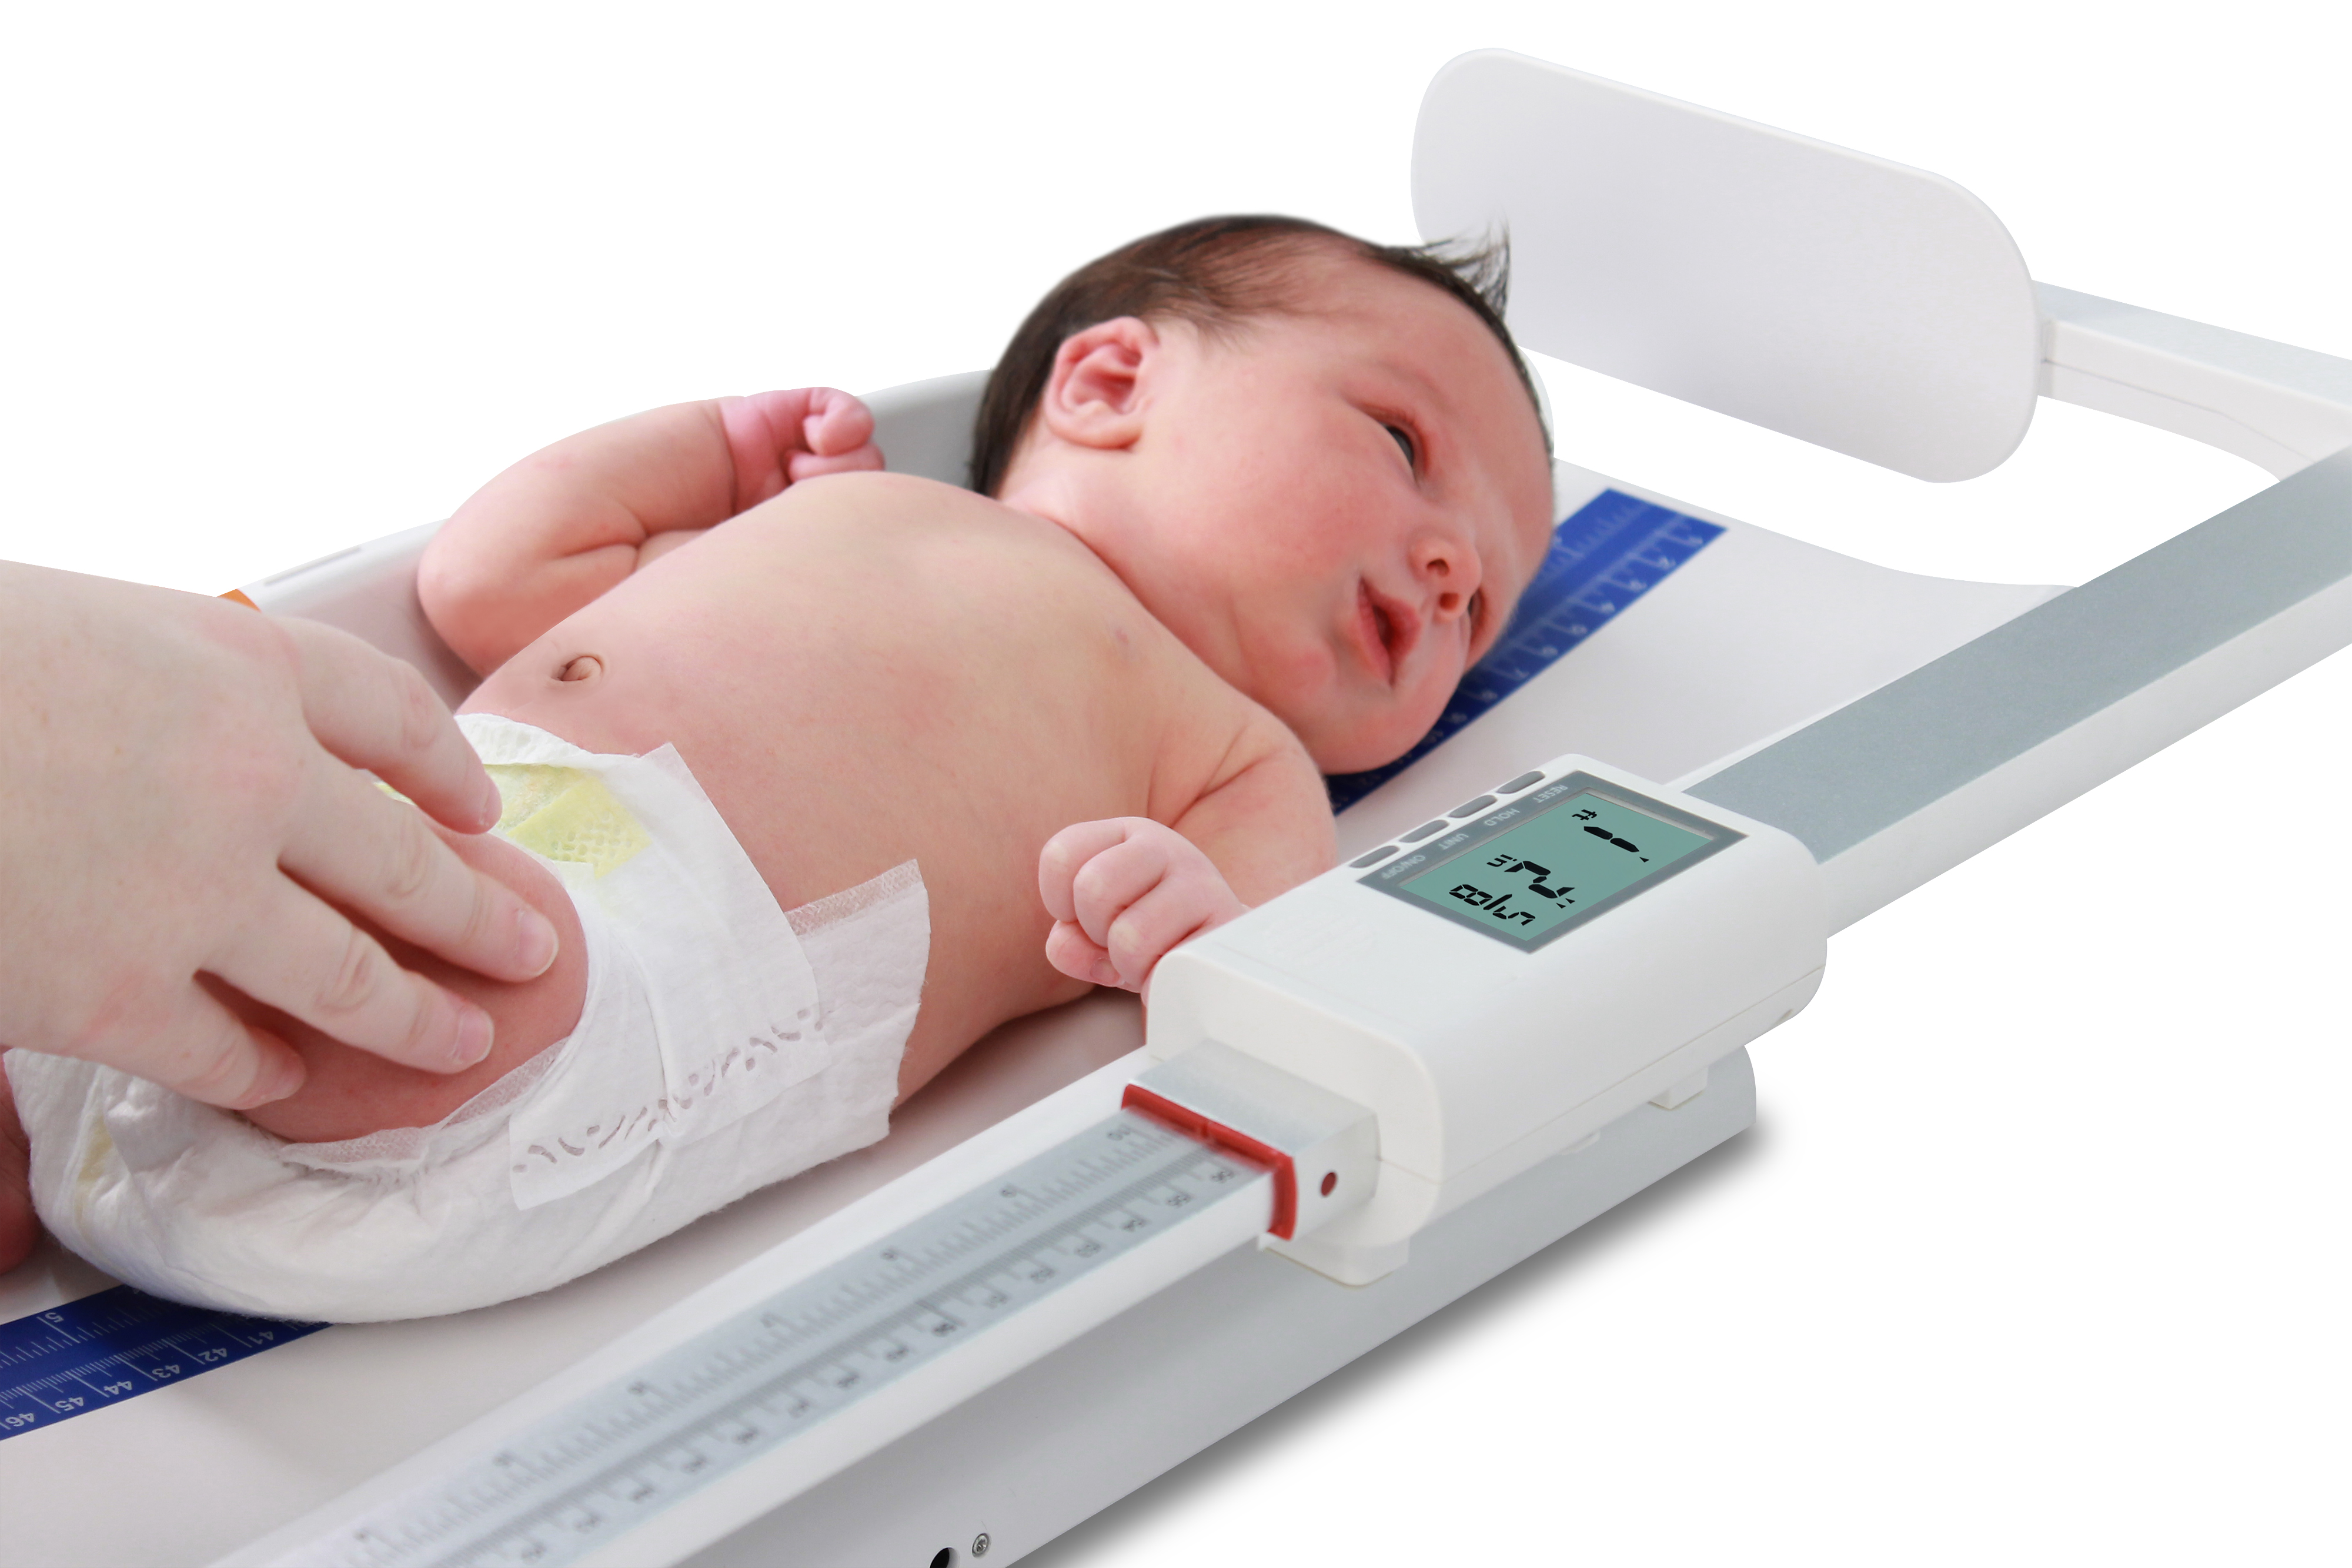 Detecto MB130 Baby Scale